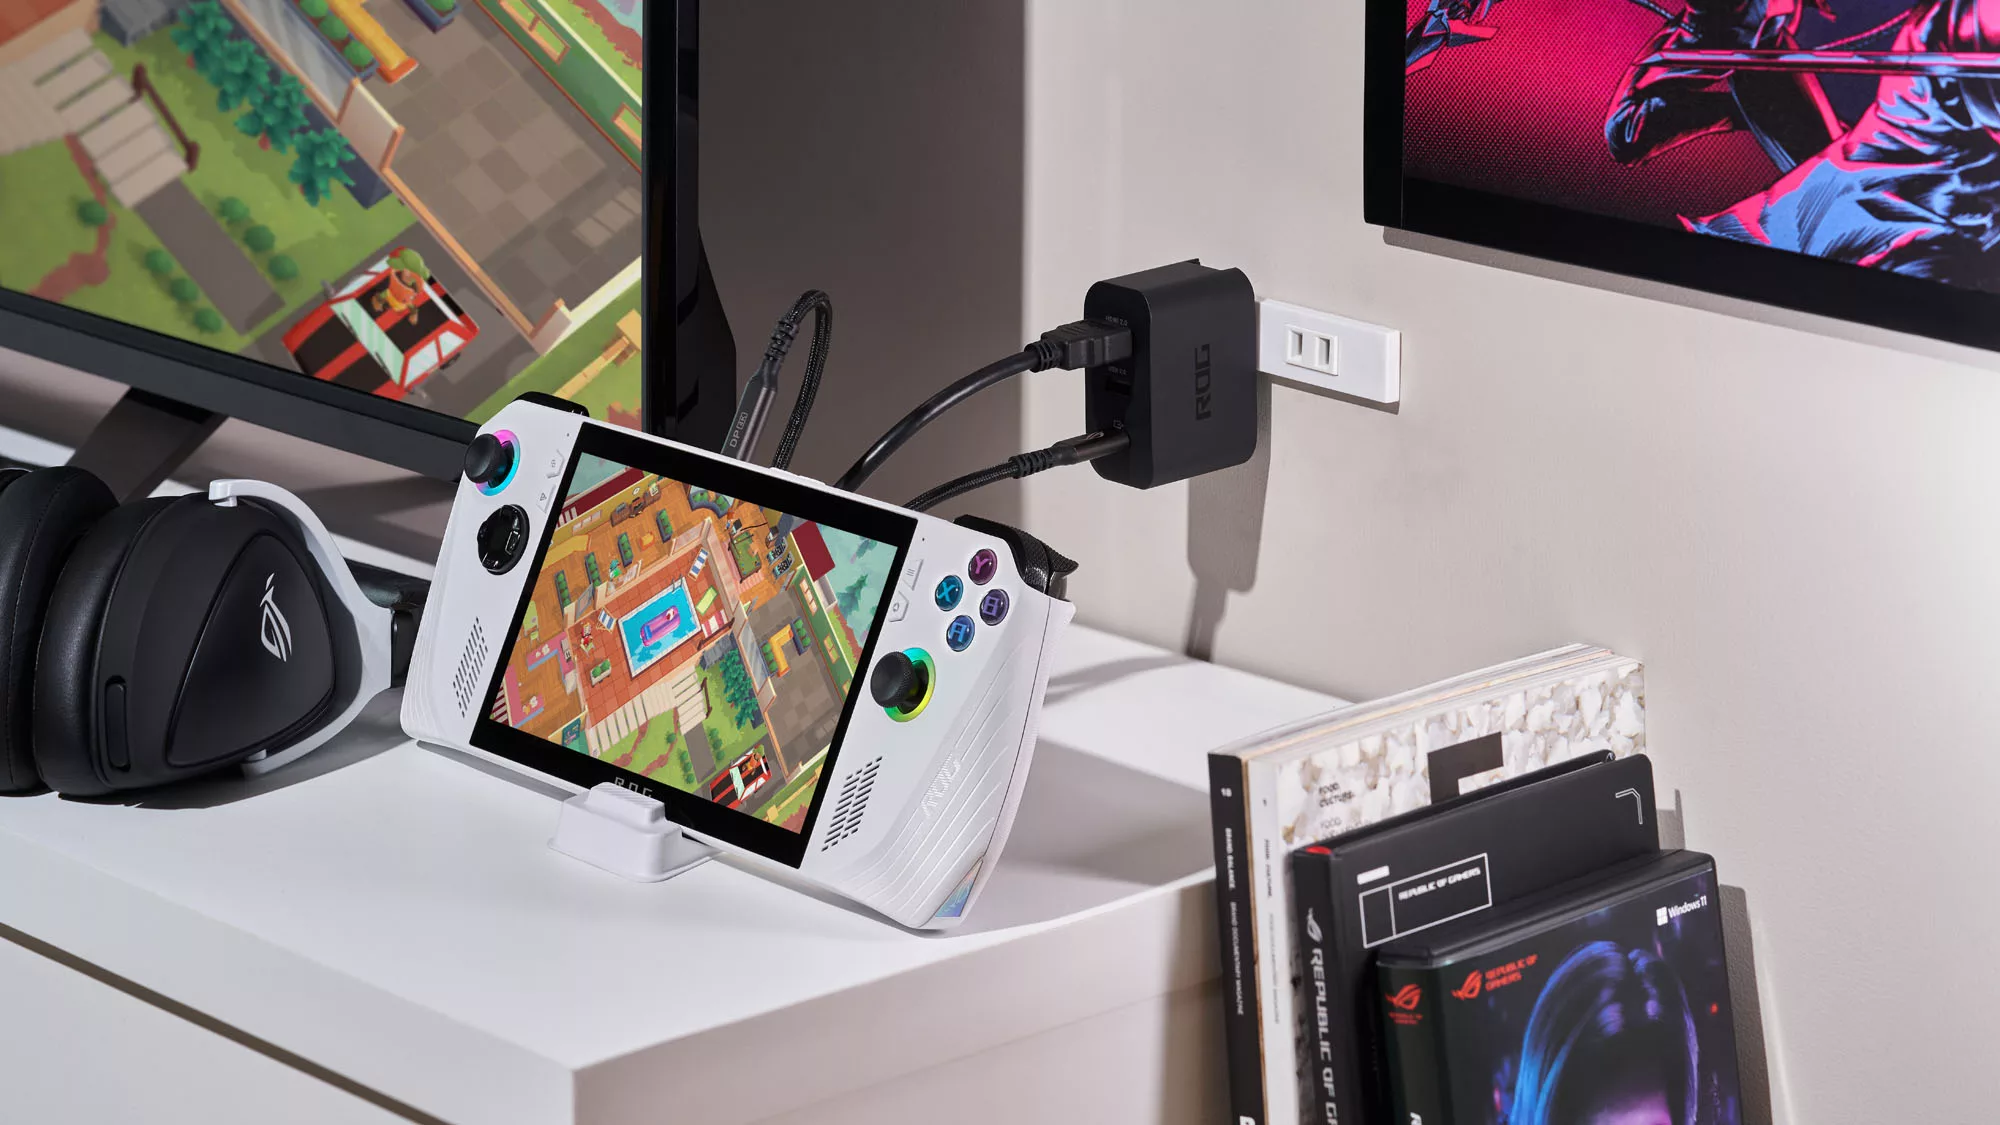 An ROG ally sitting on a table, plugged into the Gaming Charger Dock with a game displaying on a TV.